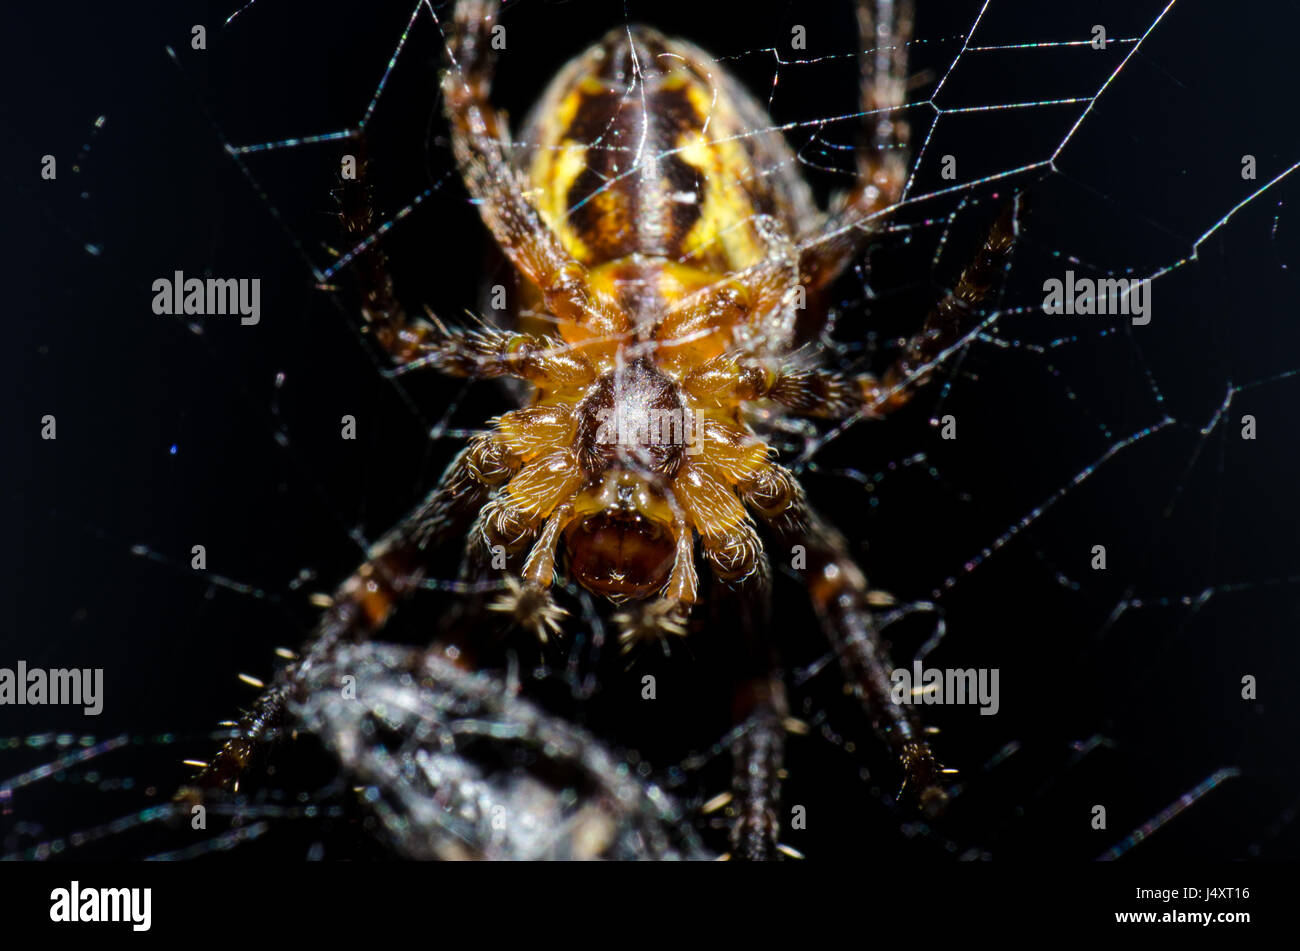 Close up of a European garden spider (cross spider) in its web Stock Photo